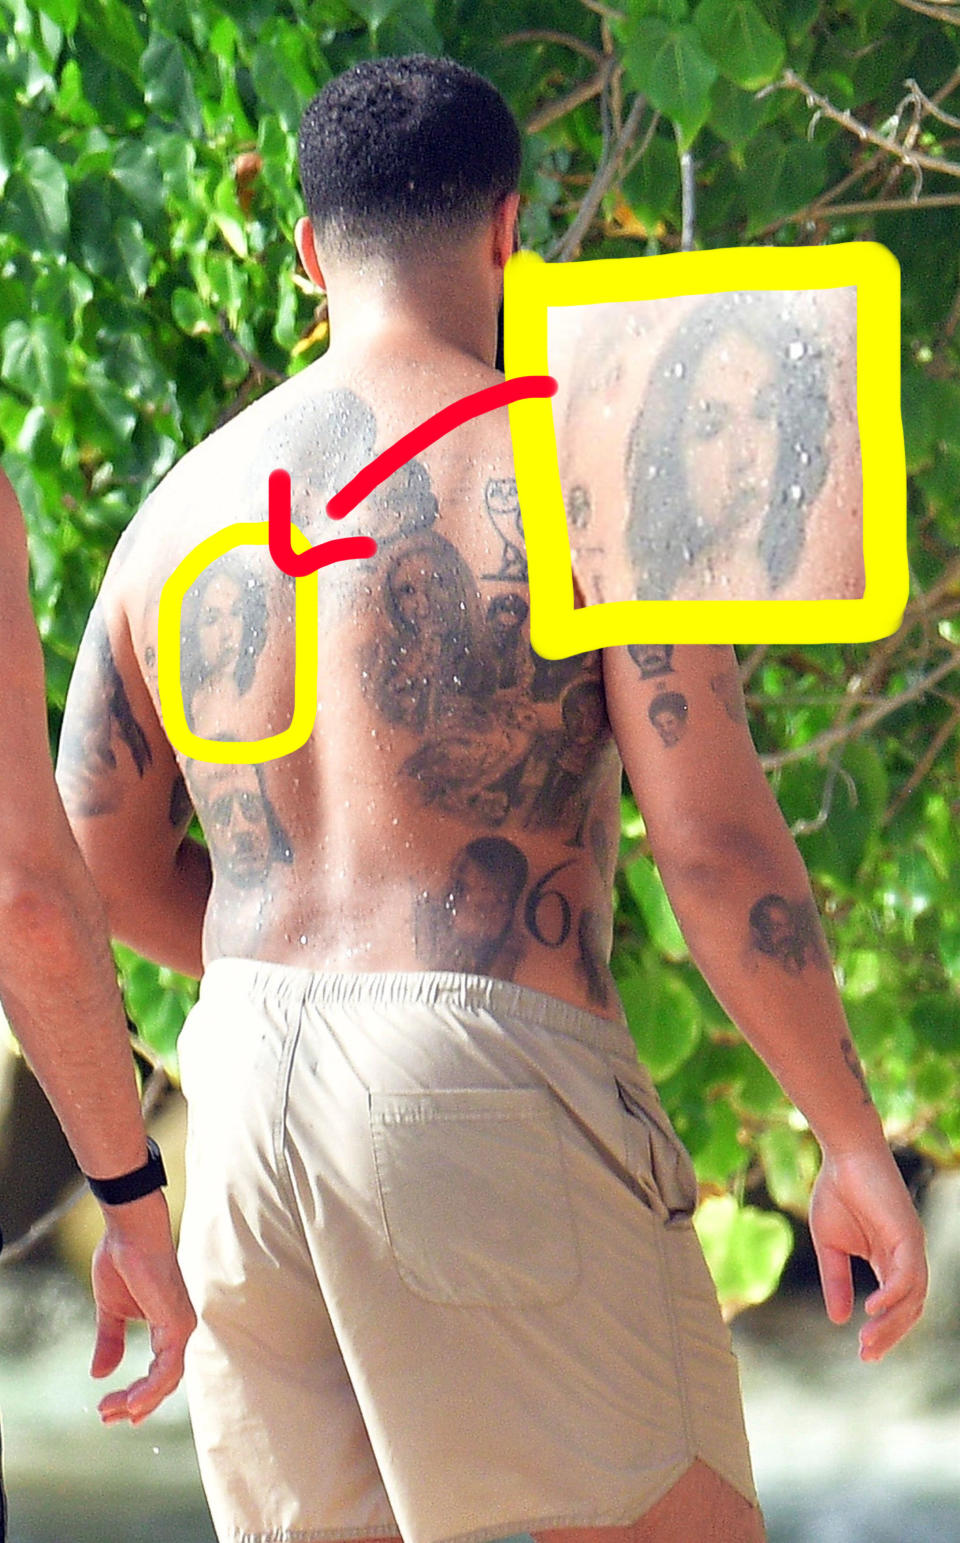 it's part of his large collection of back tattoos